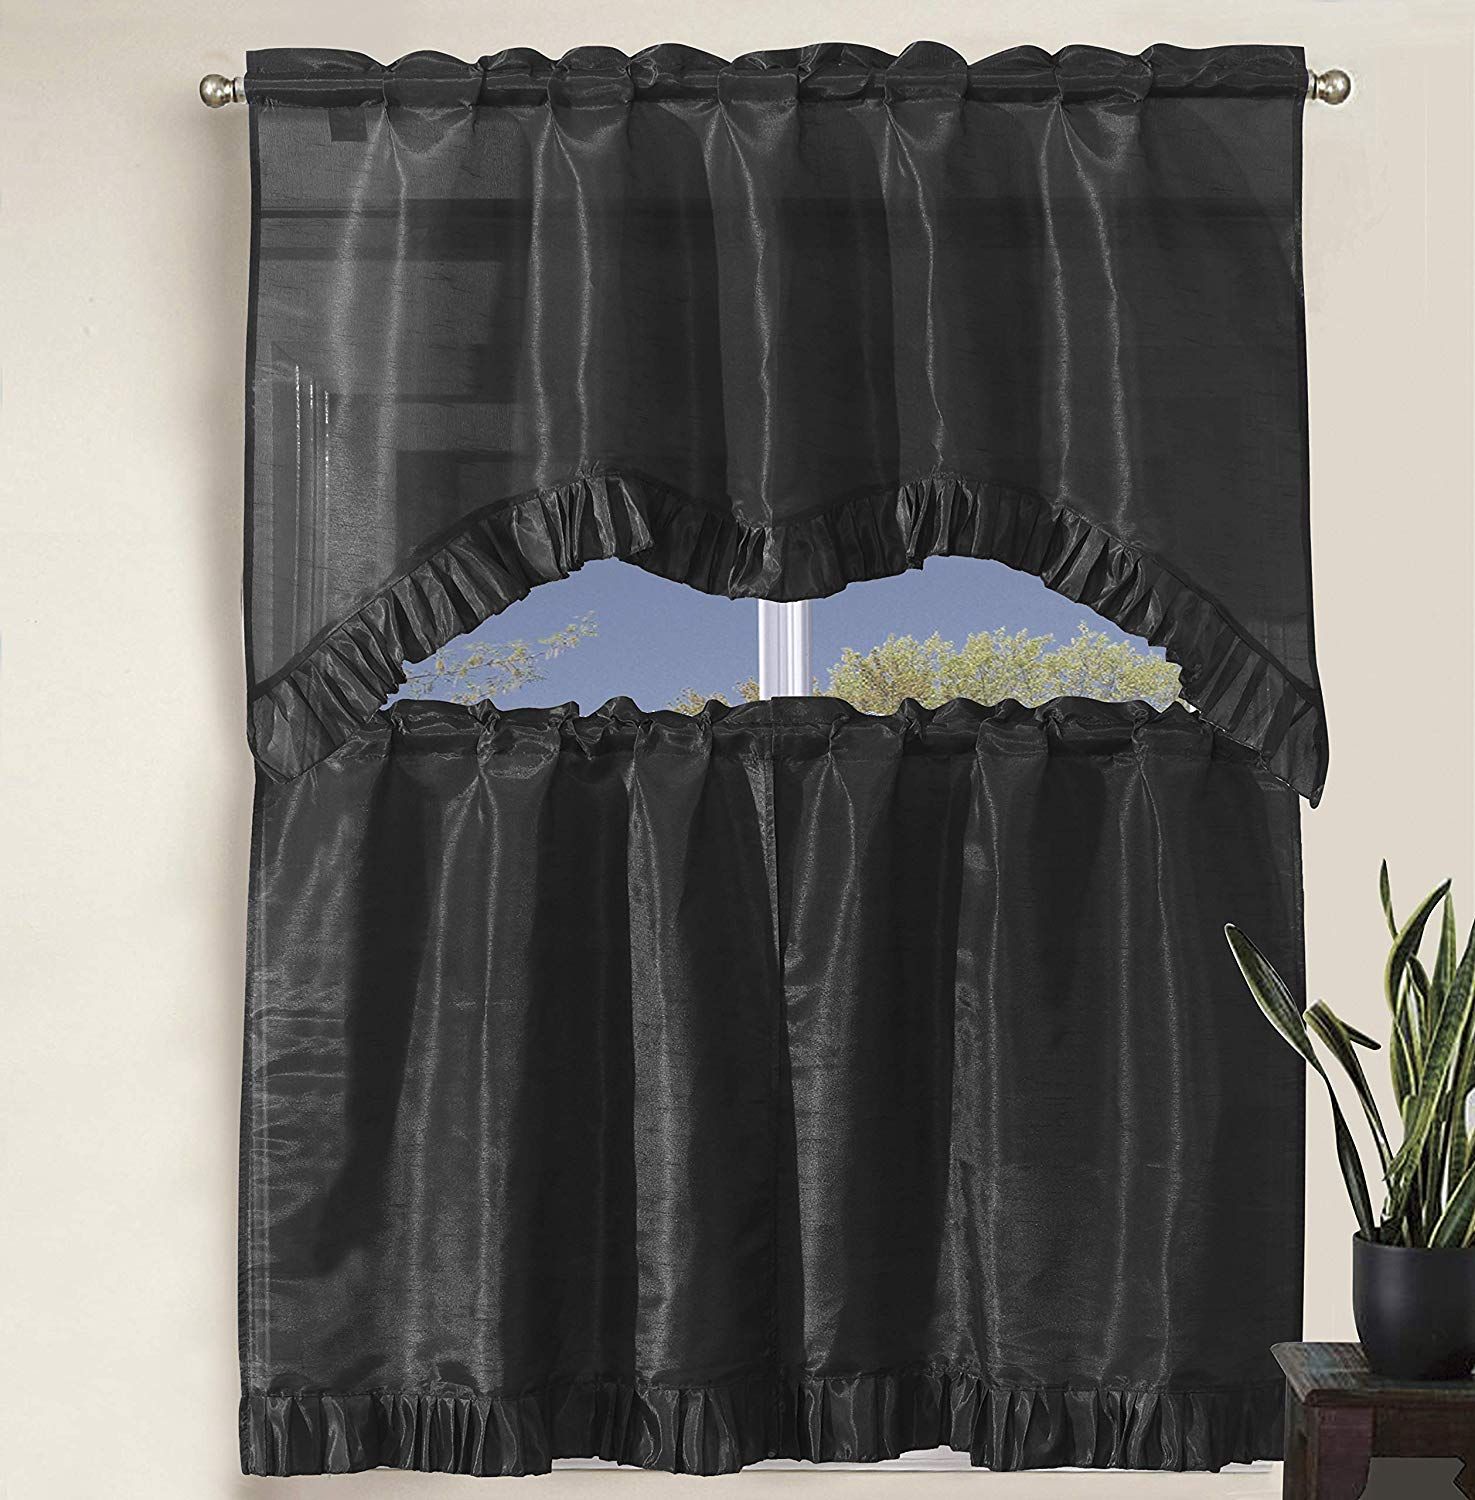 Decotex 3 Piece Pleated Ruffles Faux Silk Solid Kitchen Window Treatment  Curtain Set With Tiers And Valance (36" Tiers With Swag Valance, Chocolate) Throughout Pleated Curtain Tiers (View 13 of 20)